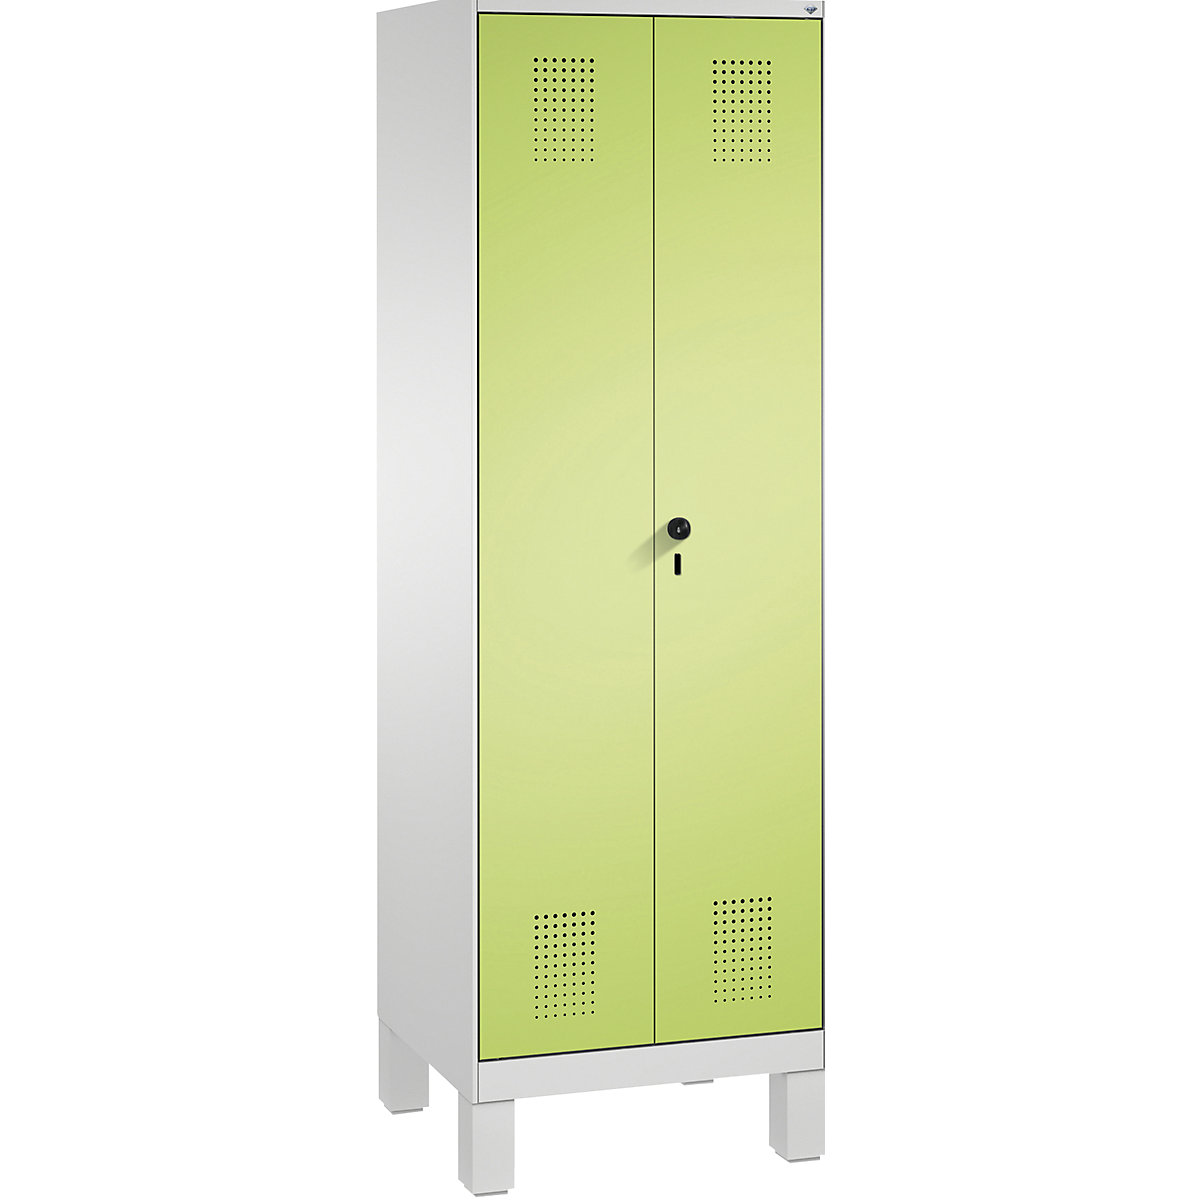 EVOLO laundry cupboard / cloakroom locker – C+P, 4 shelves, clothes rail, compartments 2 x 300 mm, with feet, light grey / viridian green-7